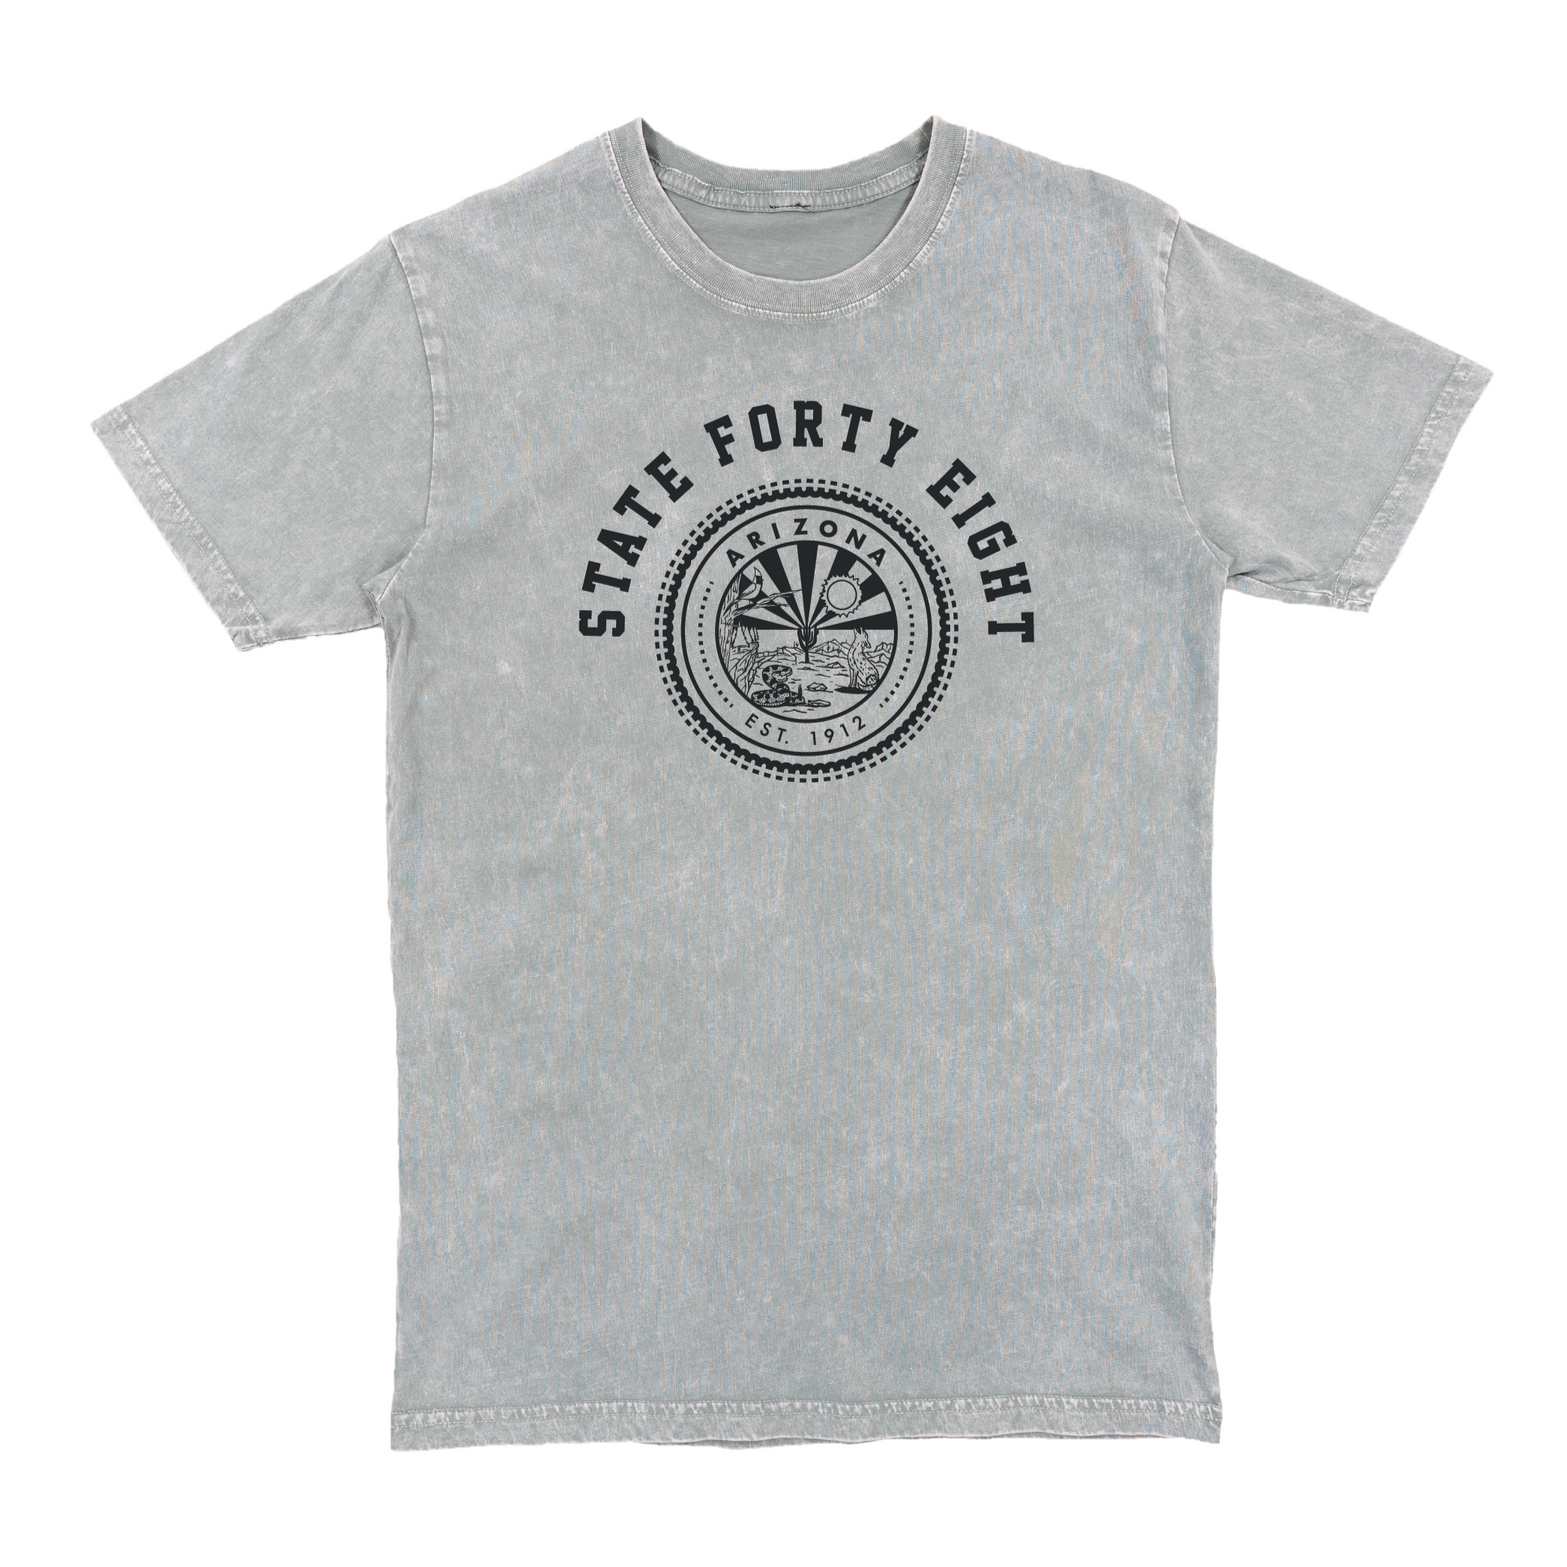 State Forty Eight University Tee